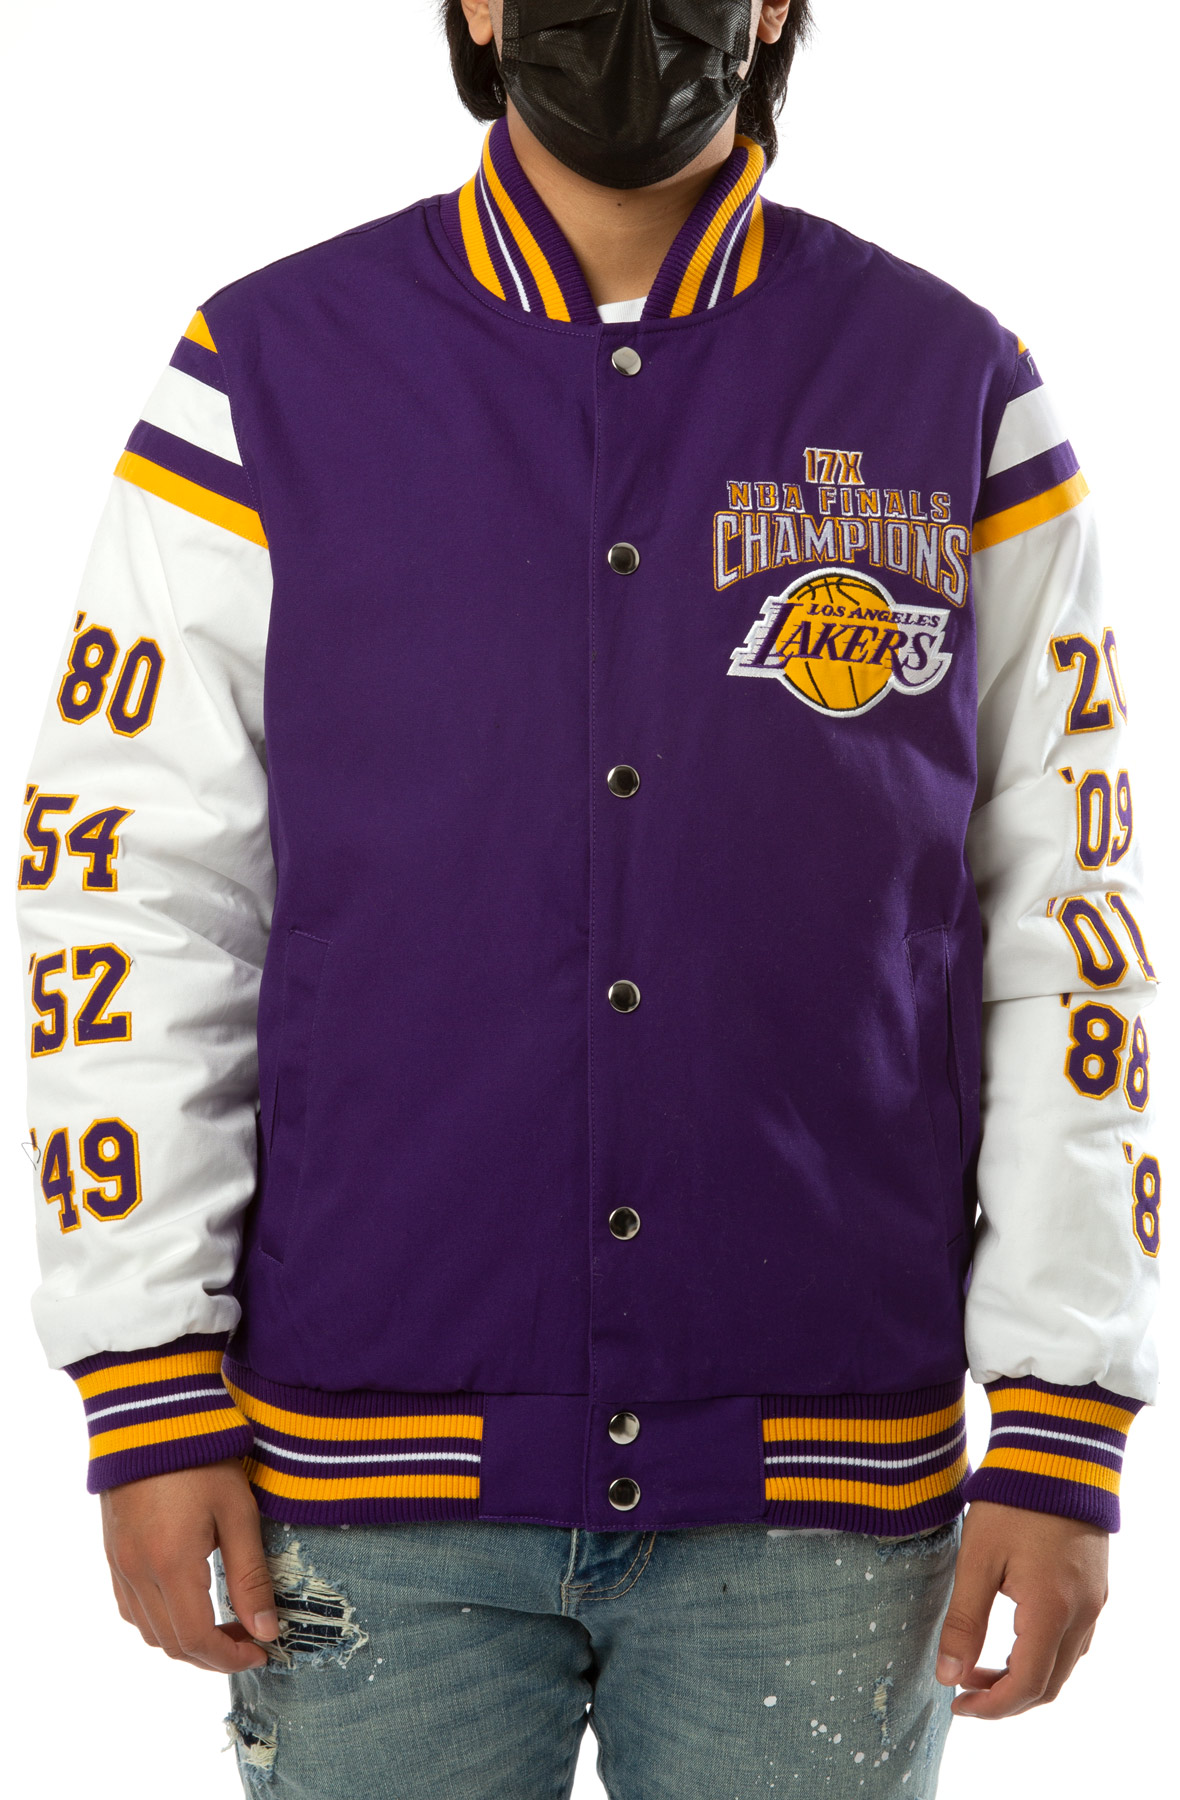 Authentic NBA Los Angeles Lakers JH Design Cotton Embroidered Jacket Black Purpl - S